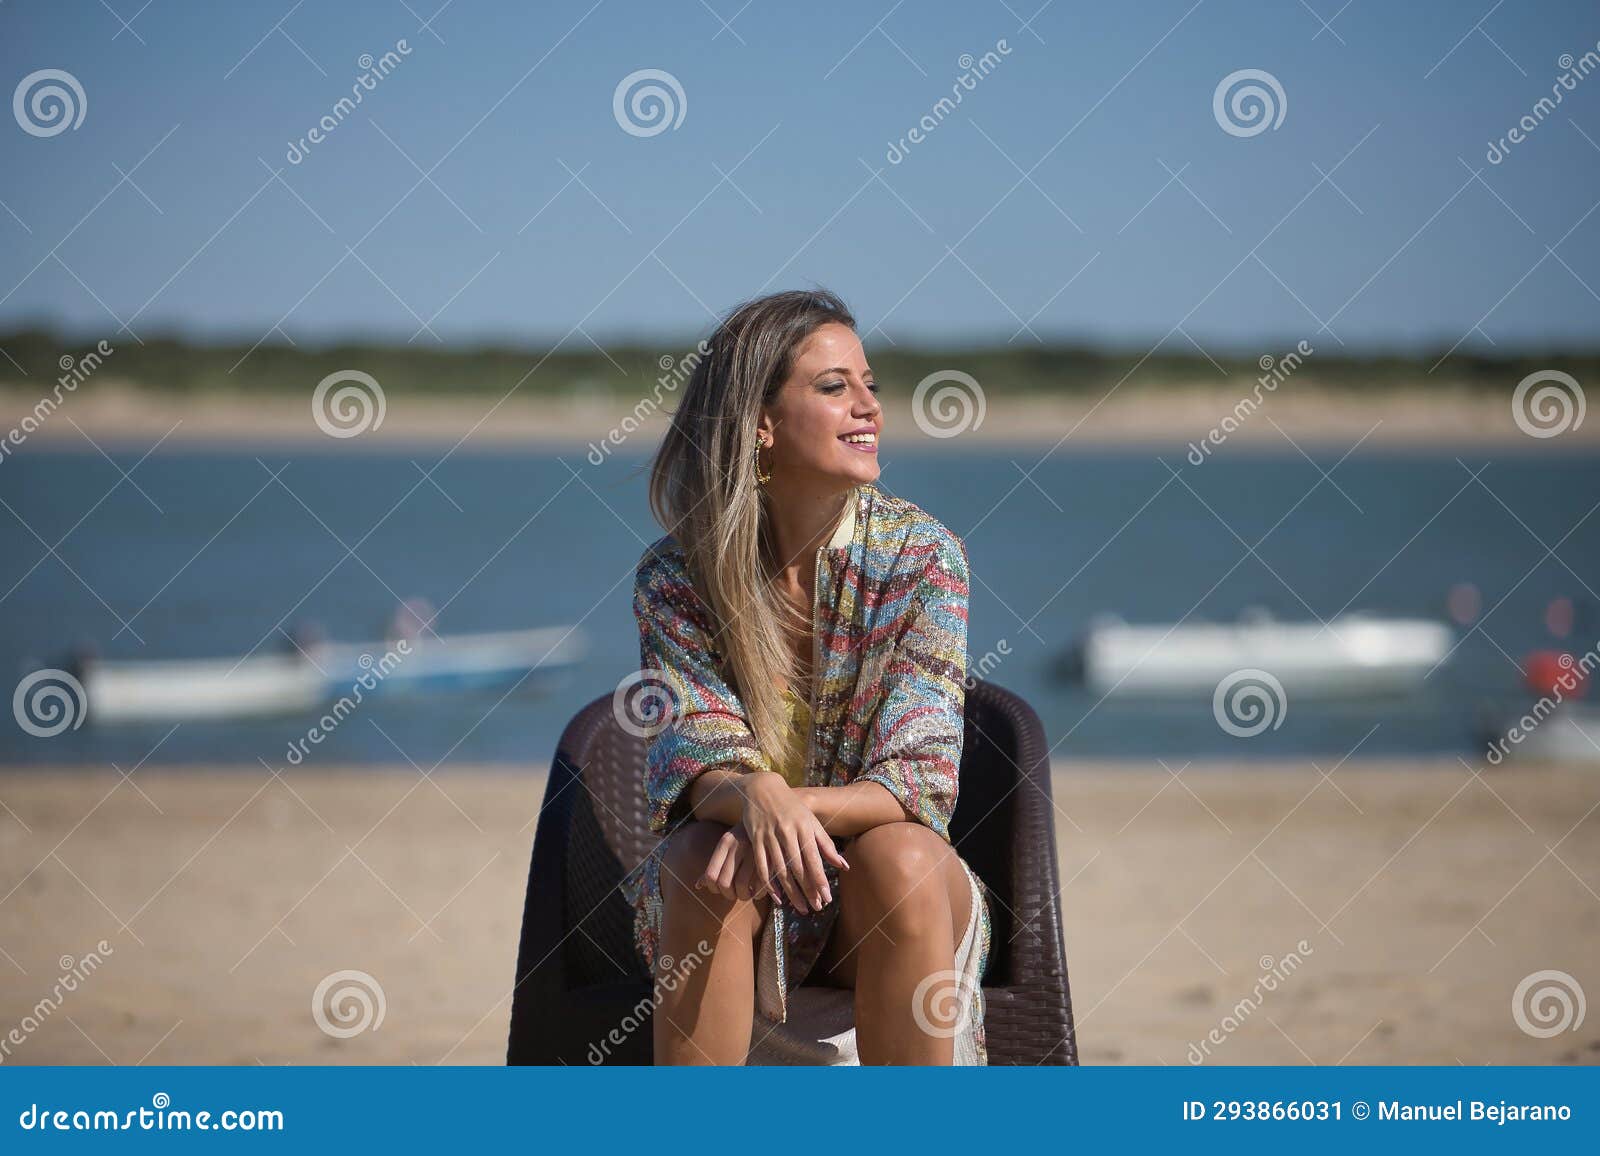 Young and Beautiful Woman in a Sequined Dress, Sitting on a Chair in ...